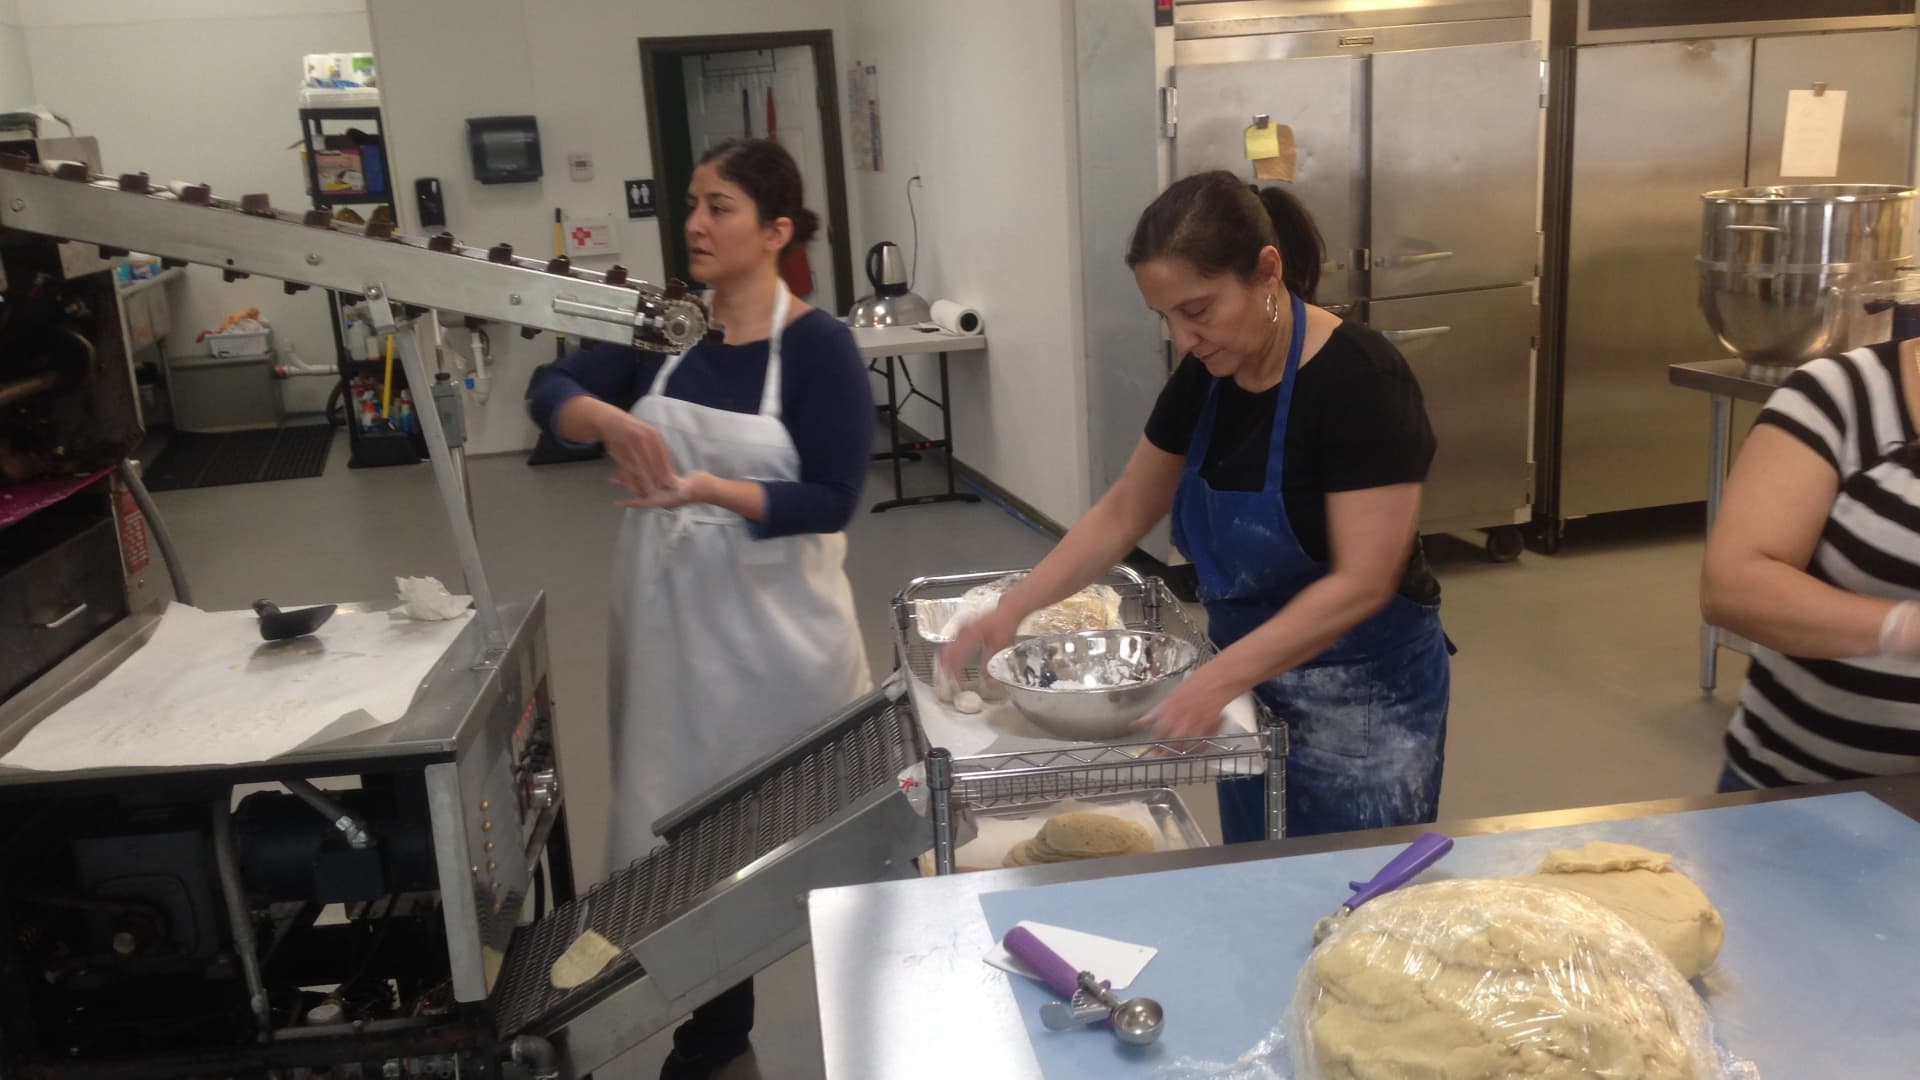 Veronica Garza and her mother, Aida, making tortillas in the Austin commercial kitchen in Siete's early days.